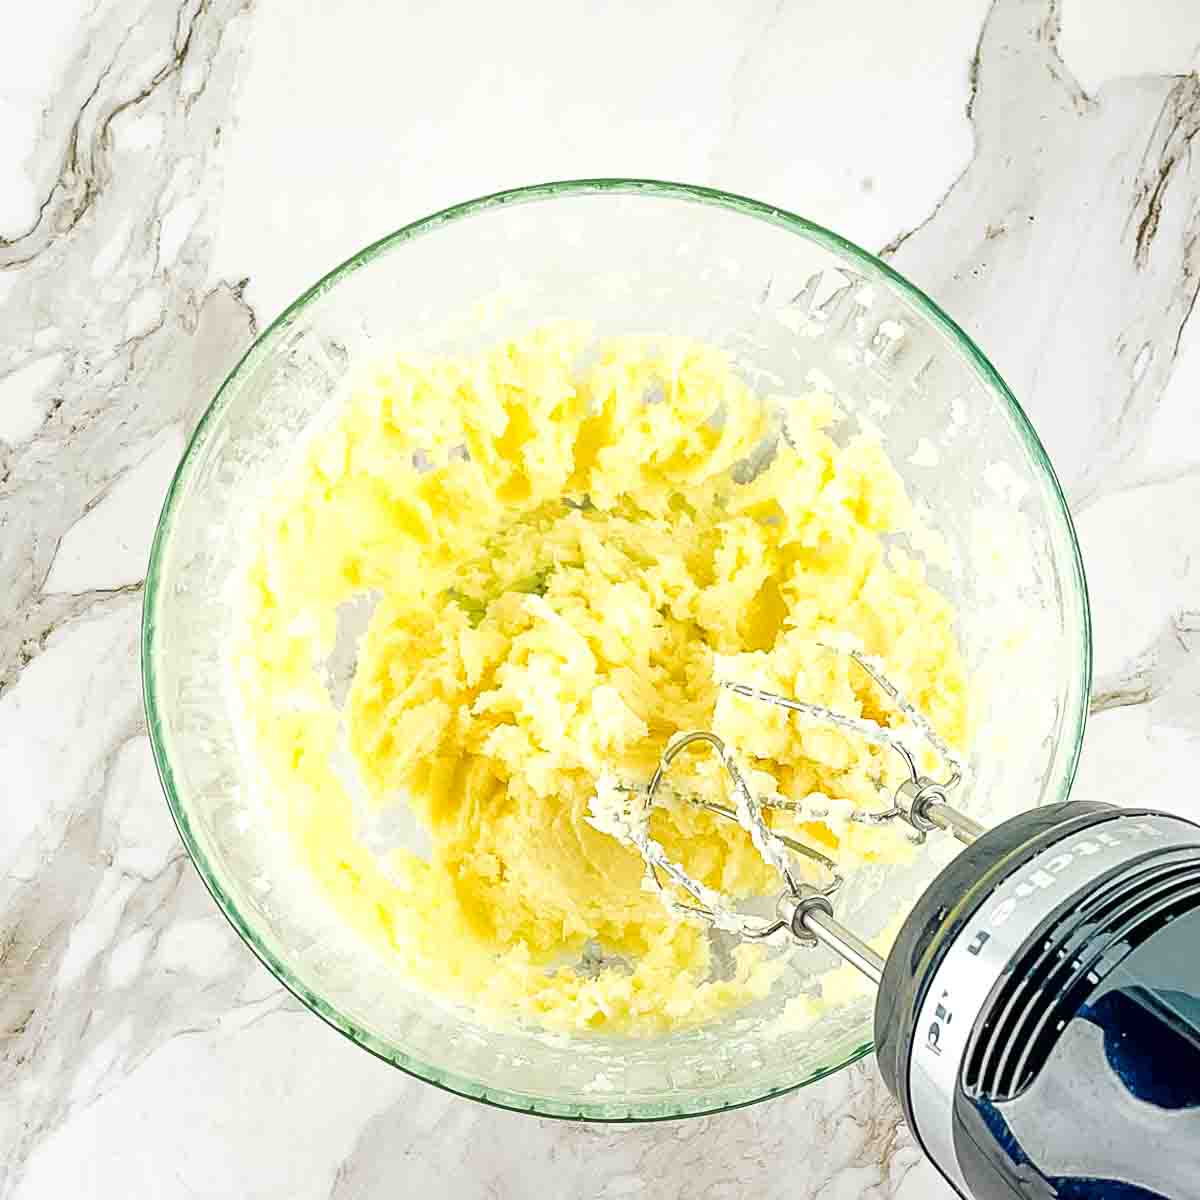 An electric mixer combining the butter and sugar in a bowl until creamy.